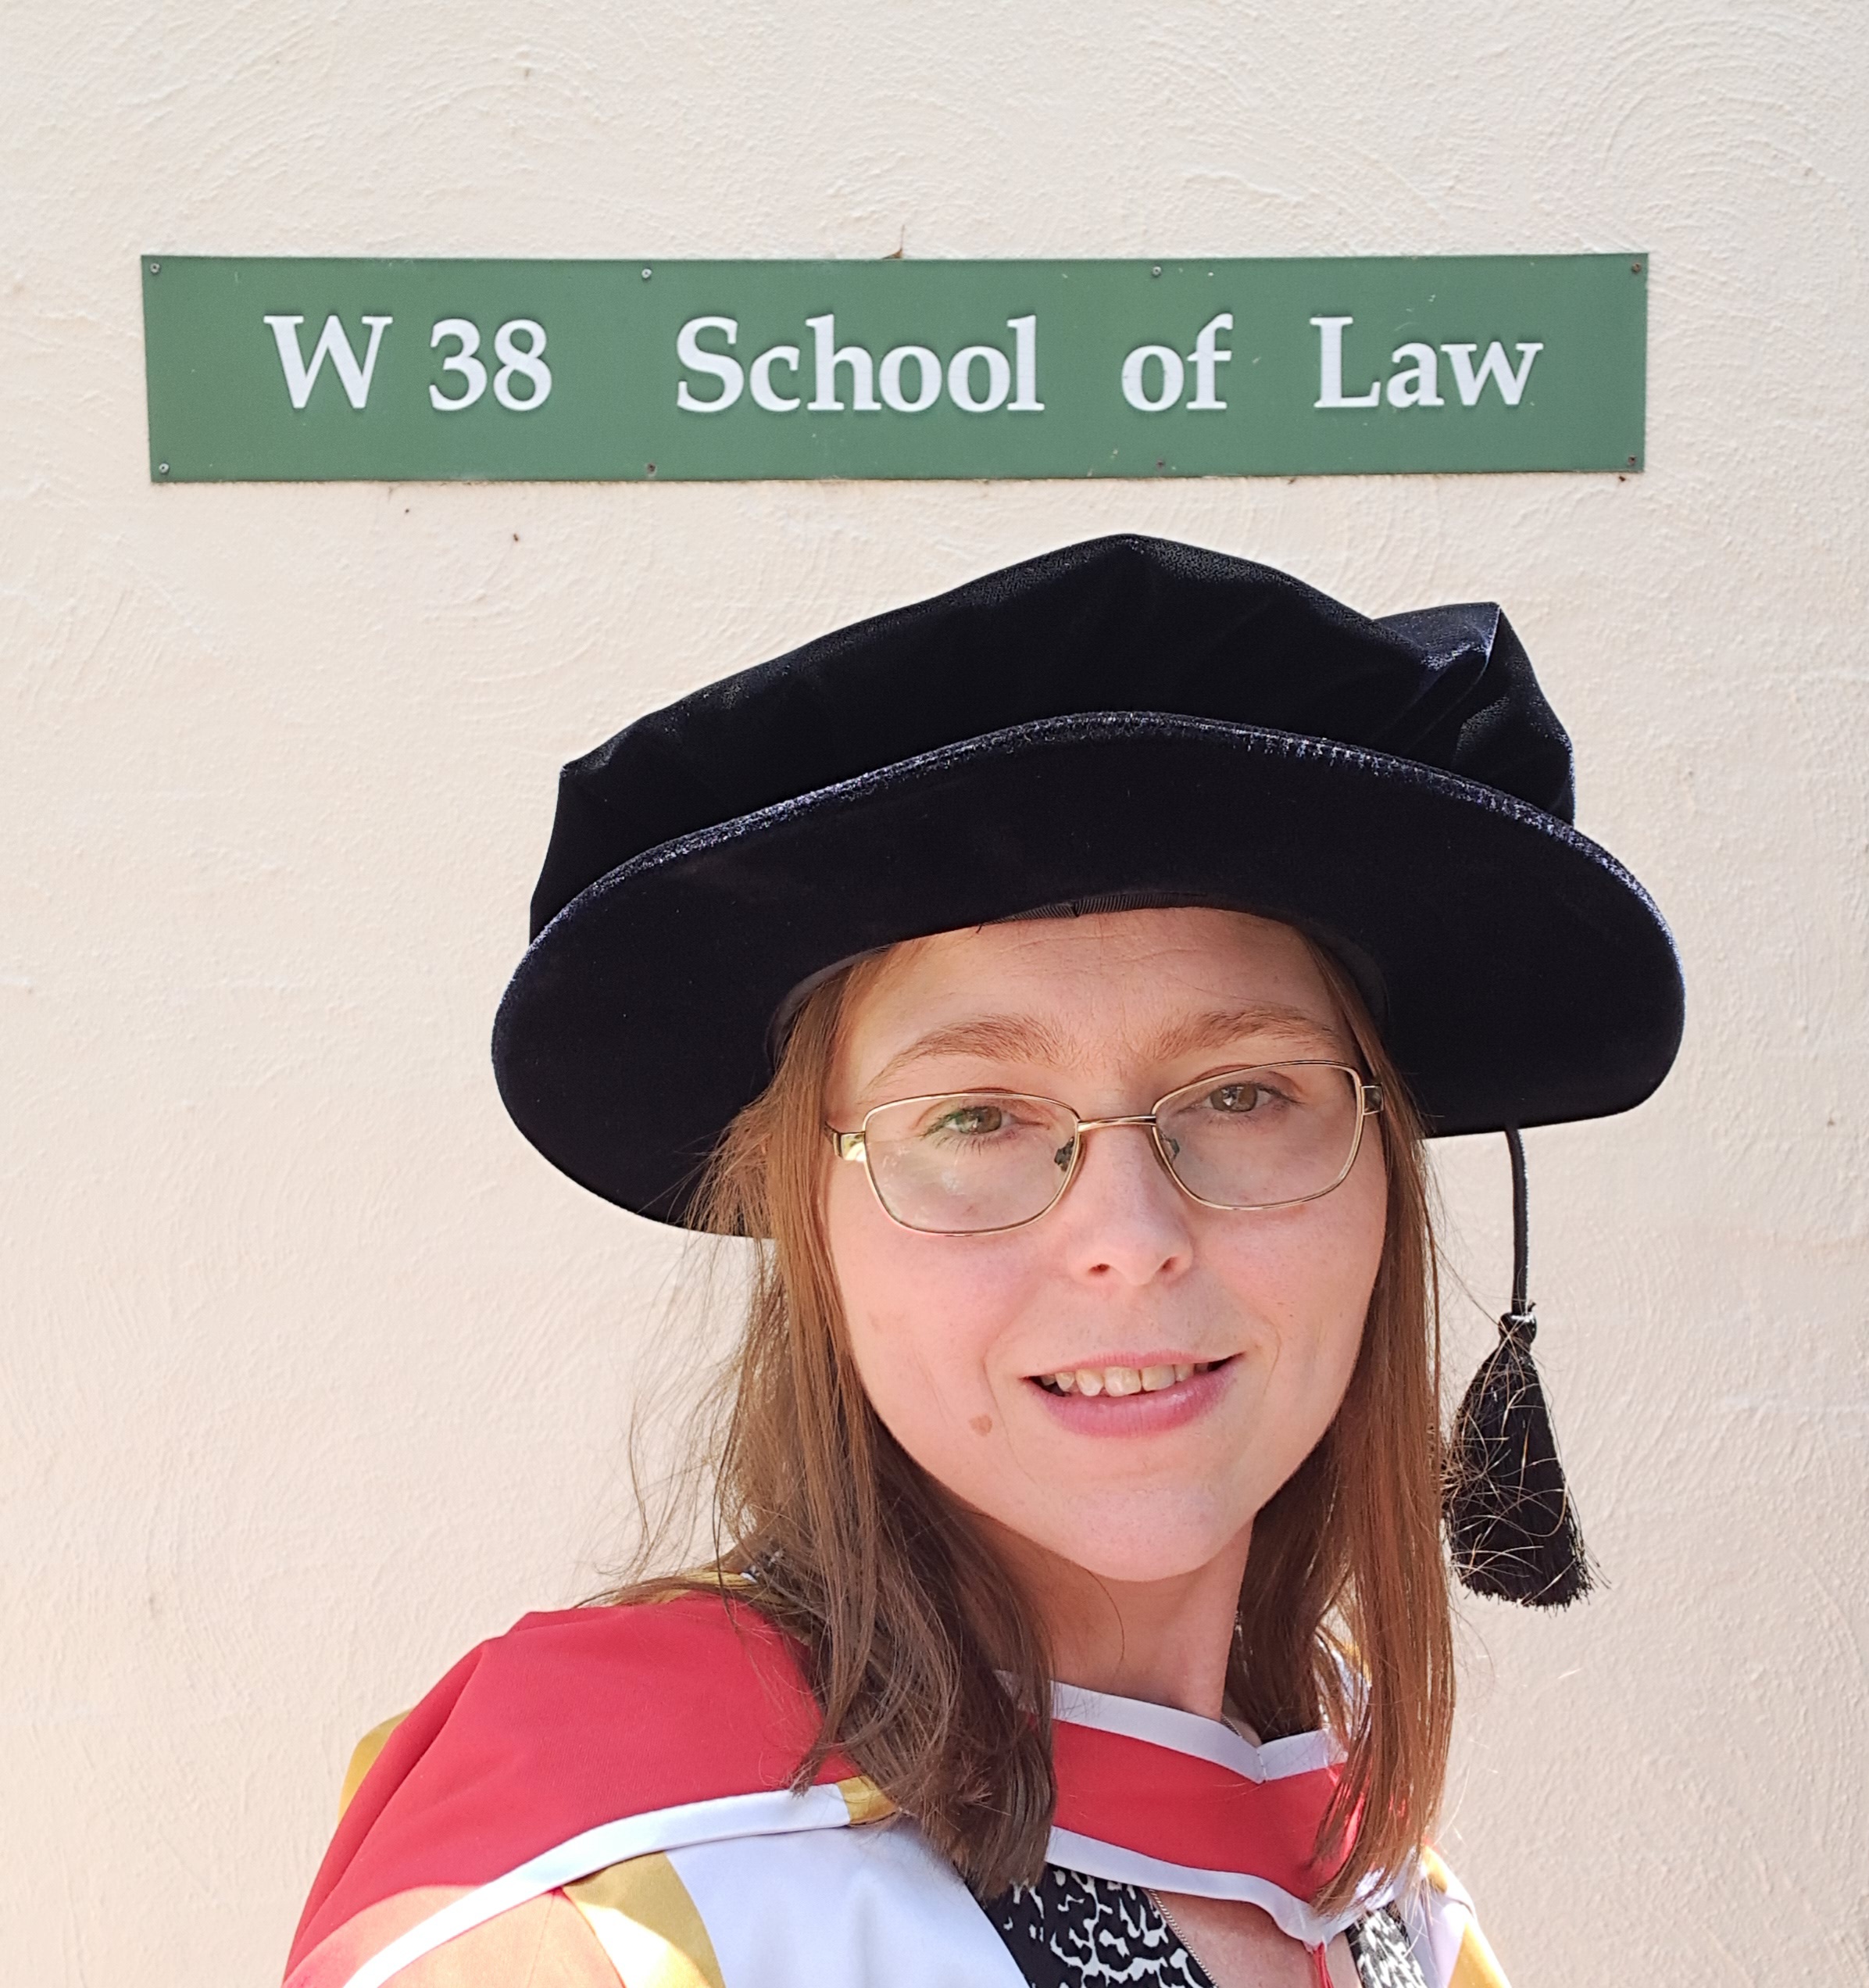 Dr Wellett Potter under Law School sign on campus dressed in formal graduation gown.